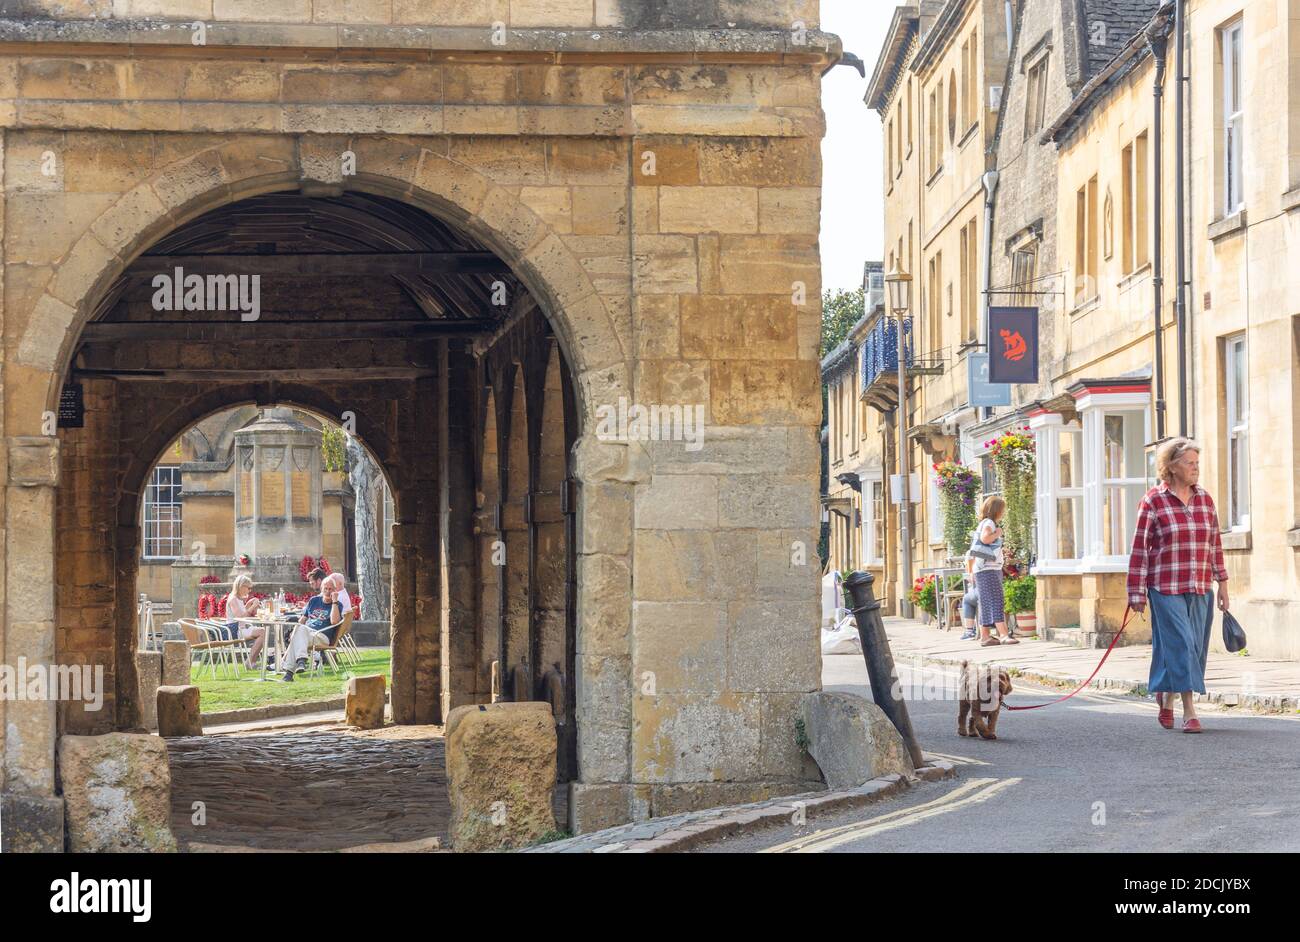 Medieval Market Hall, High Street, Chipping Campden, Gloucestershire, Angleterre, Royaume-Uni Banque D'Images